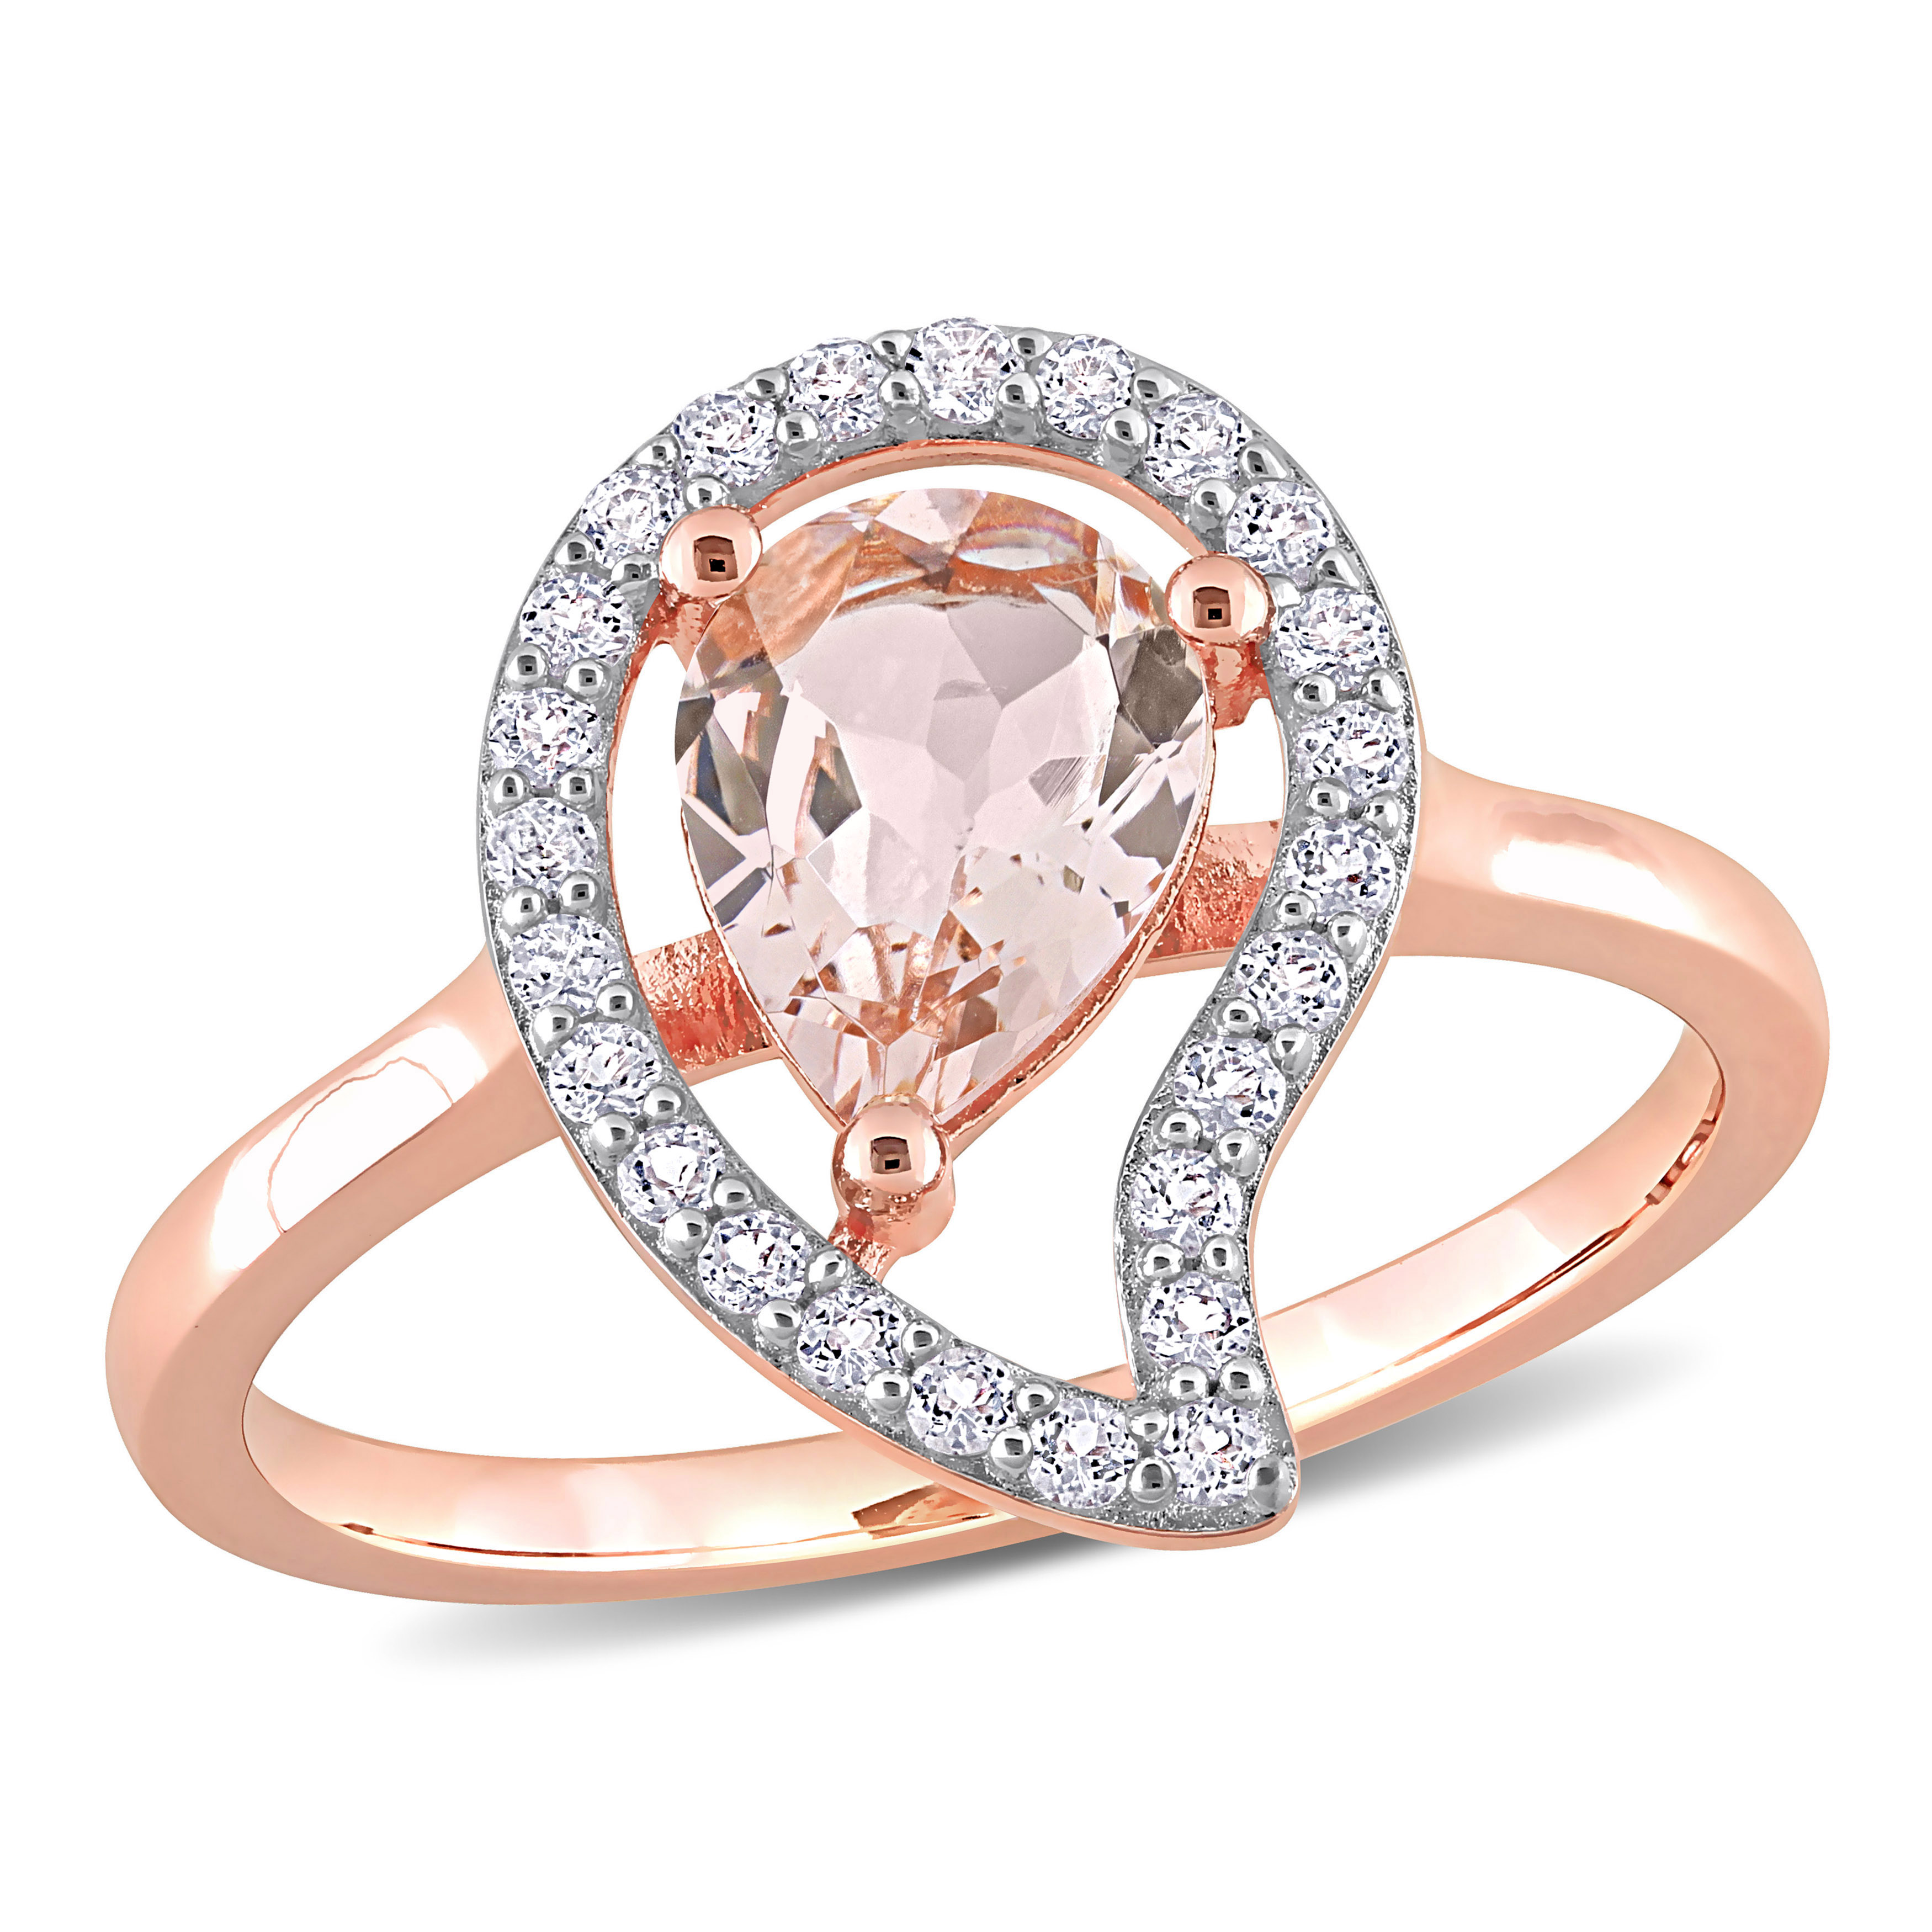 1 1/7 CT TGW Pear Shape Morganite and White Topaz Open Teardrop Ring in Rose Plated Sterling Silver